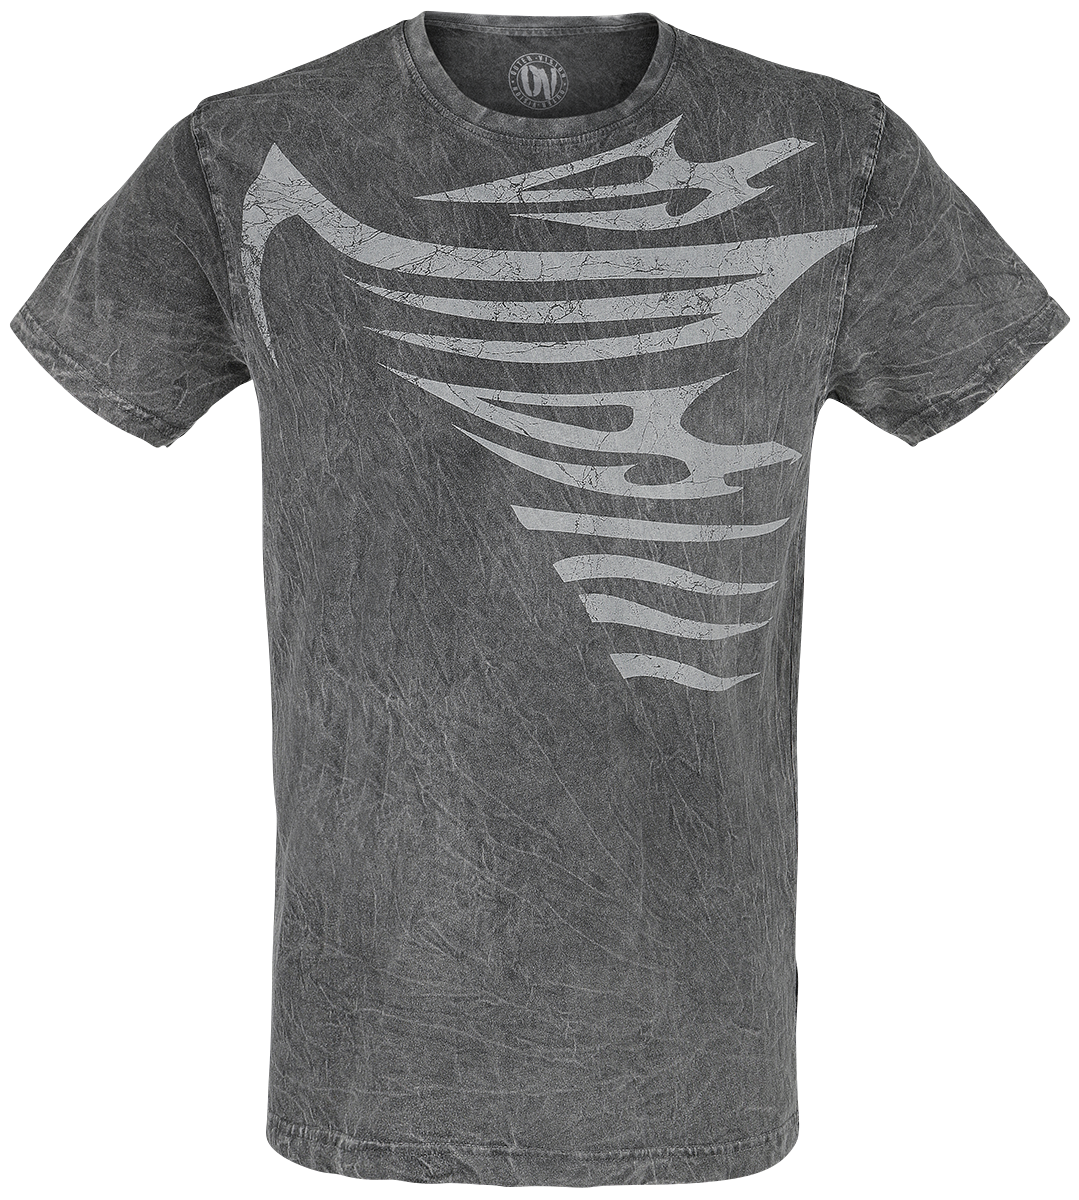 Outer Vision - Tiger Paws - T-Shirt - grey image